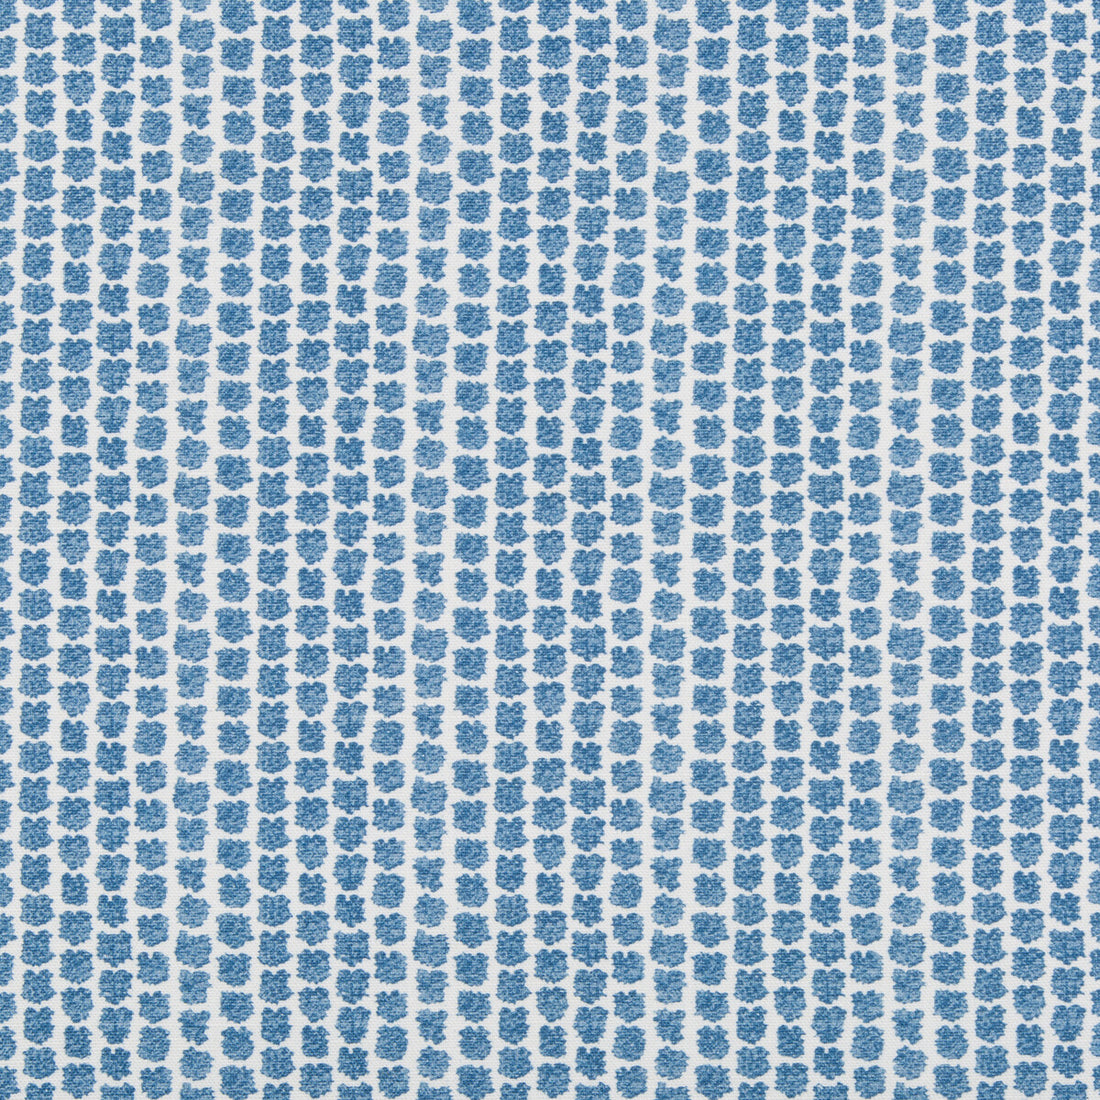 Kaya II fabric in blue color - pattern 2017224.5.0 - by Lee Jofa in the Westport collection